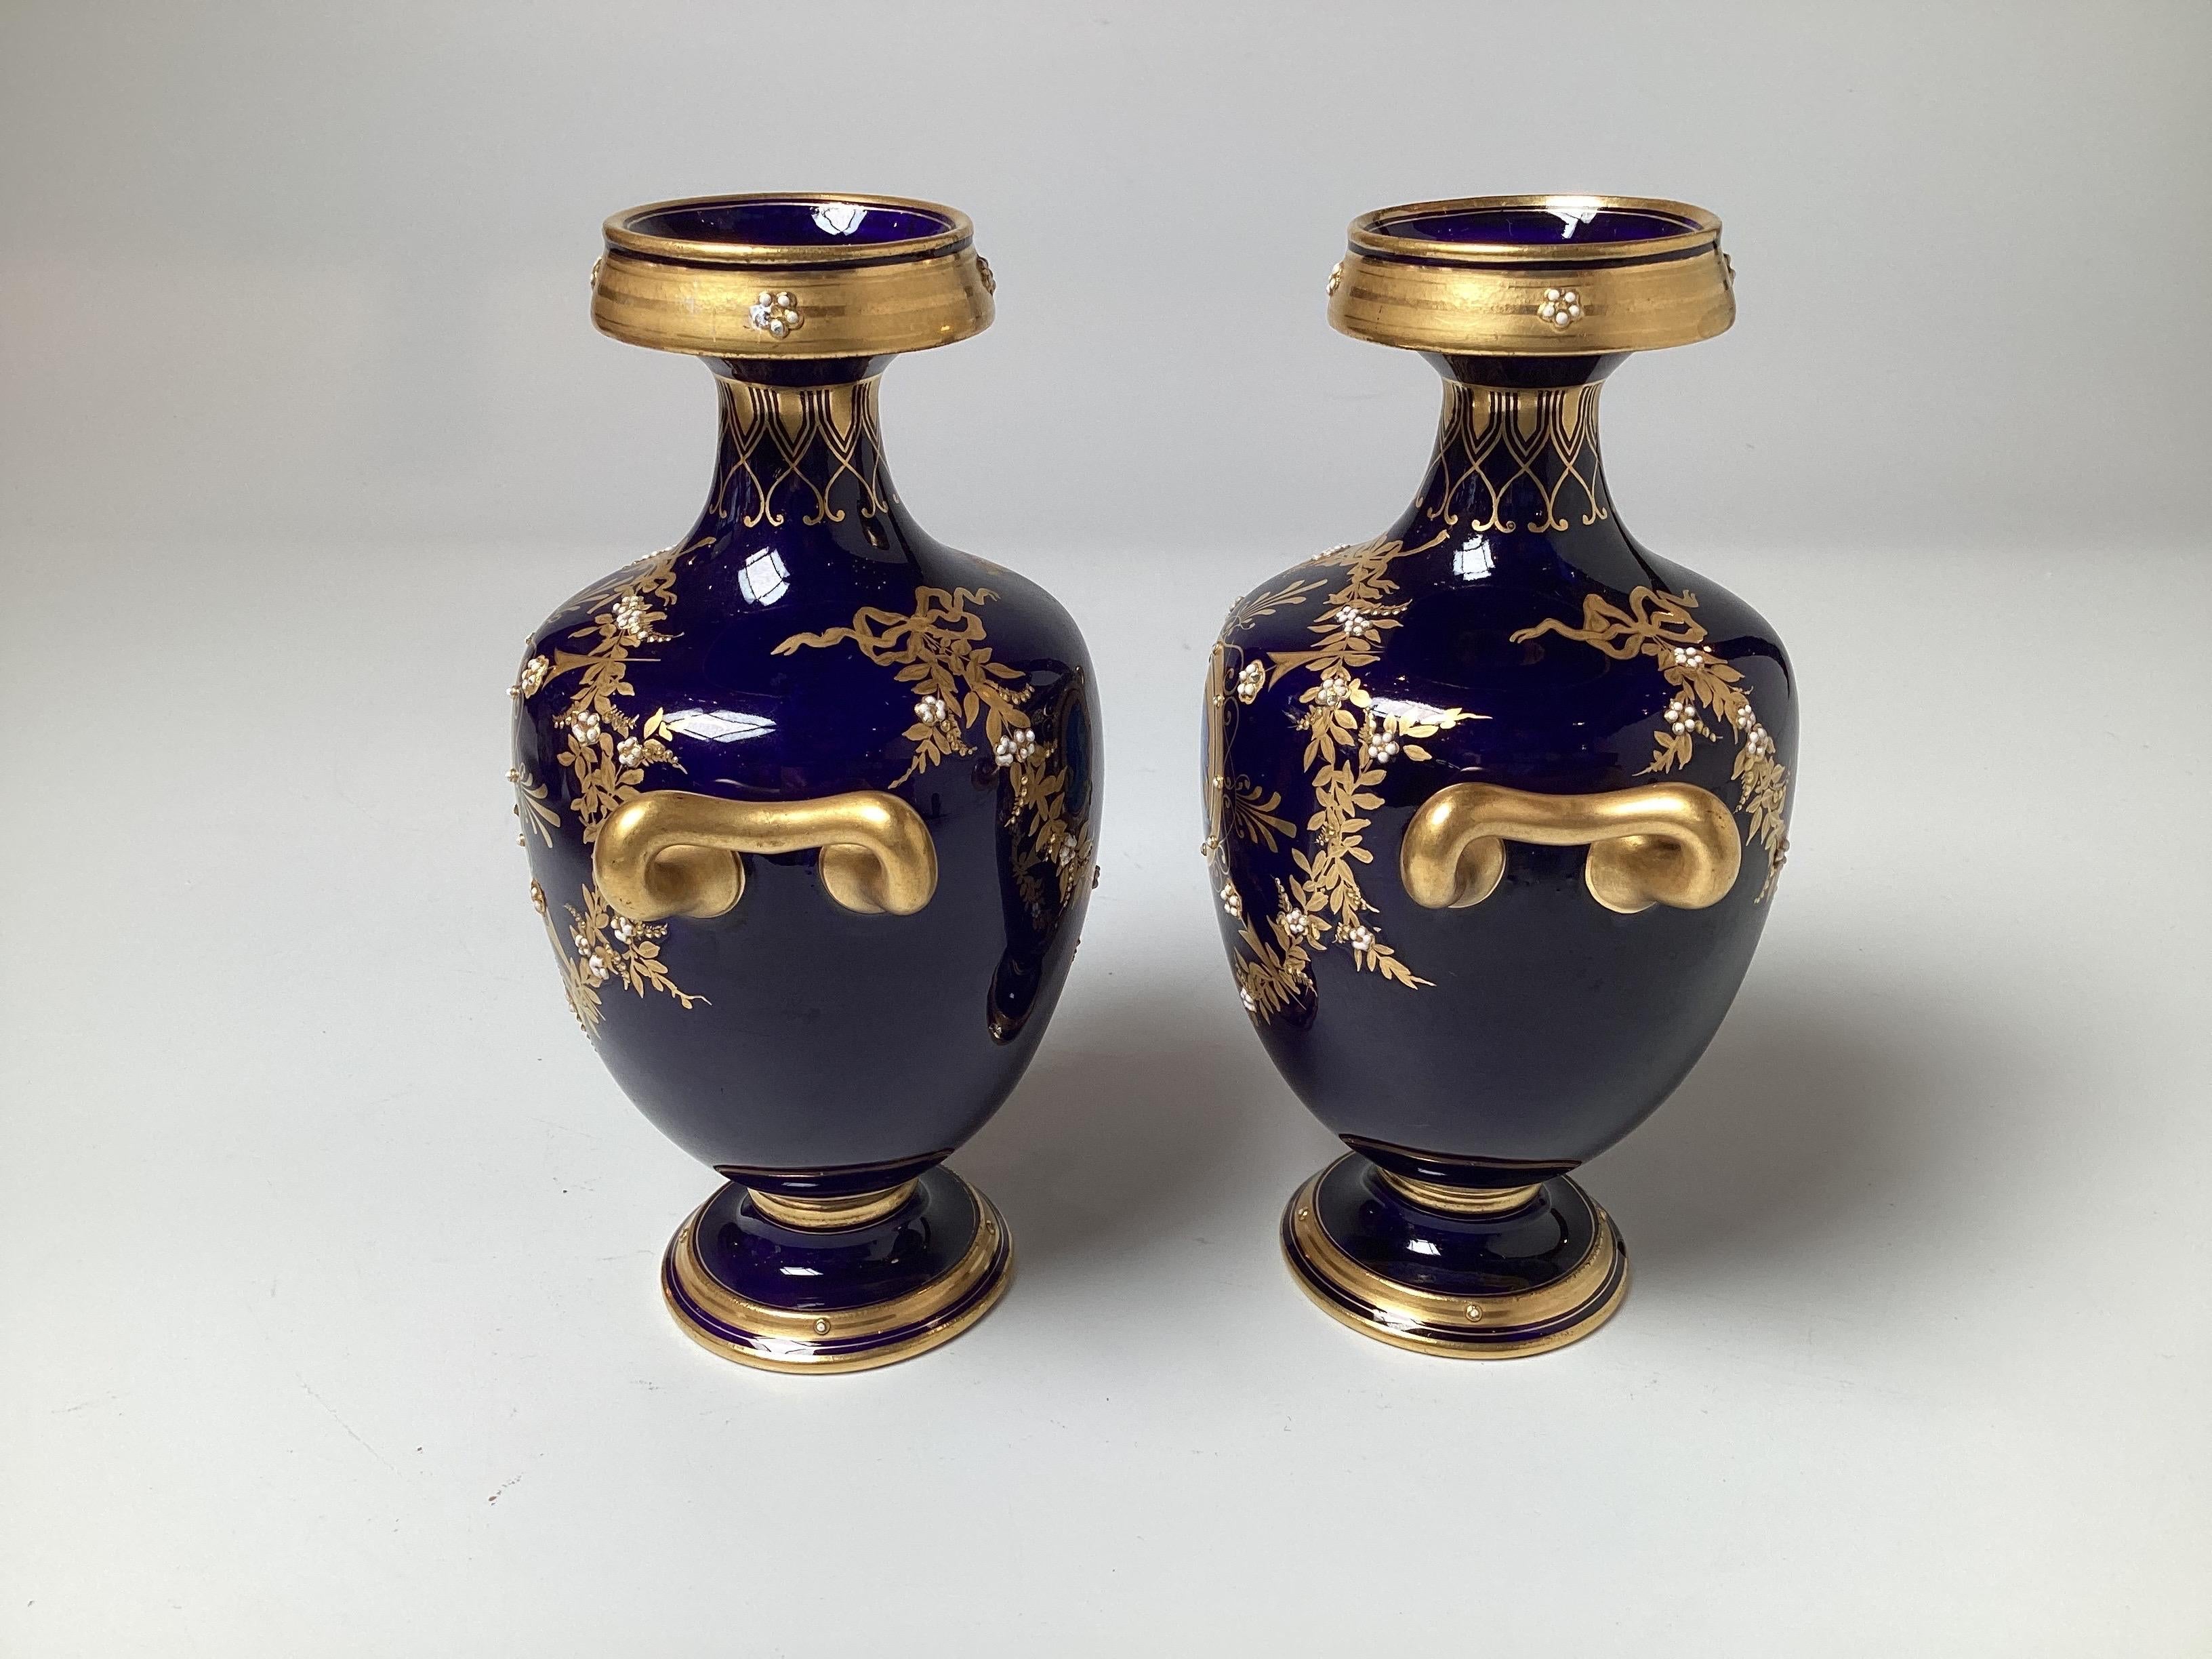 19th Century A Diminutive Pair of Cobalt and Gilt Porcelain Neoclassical Cabinet Vases For Sale